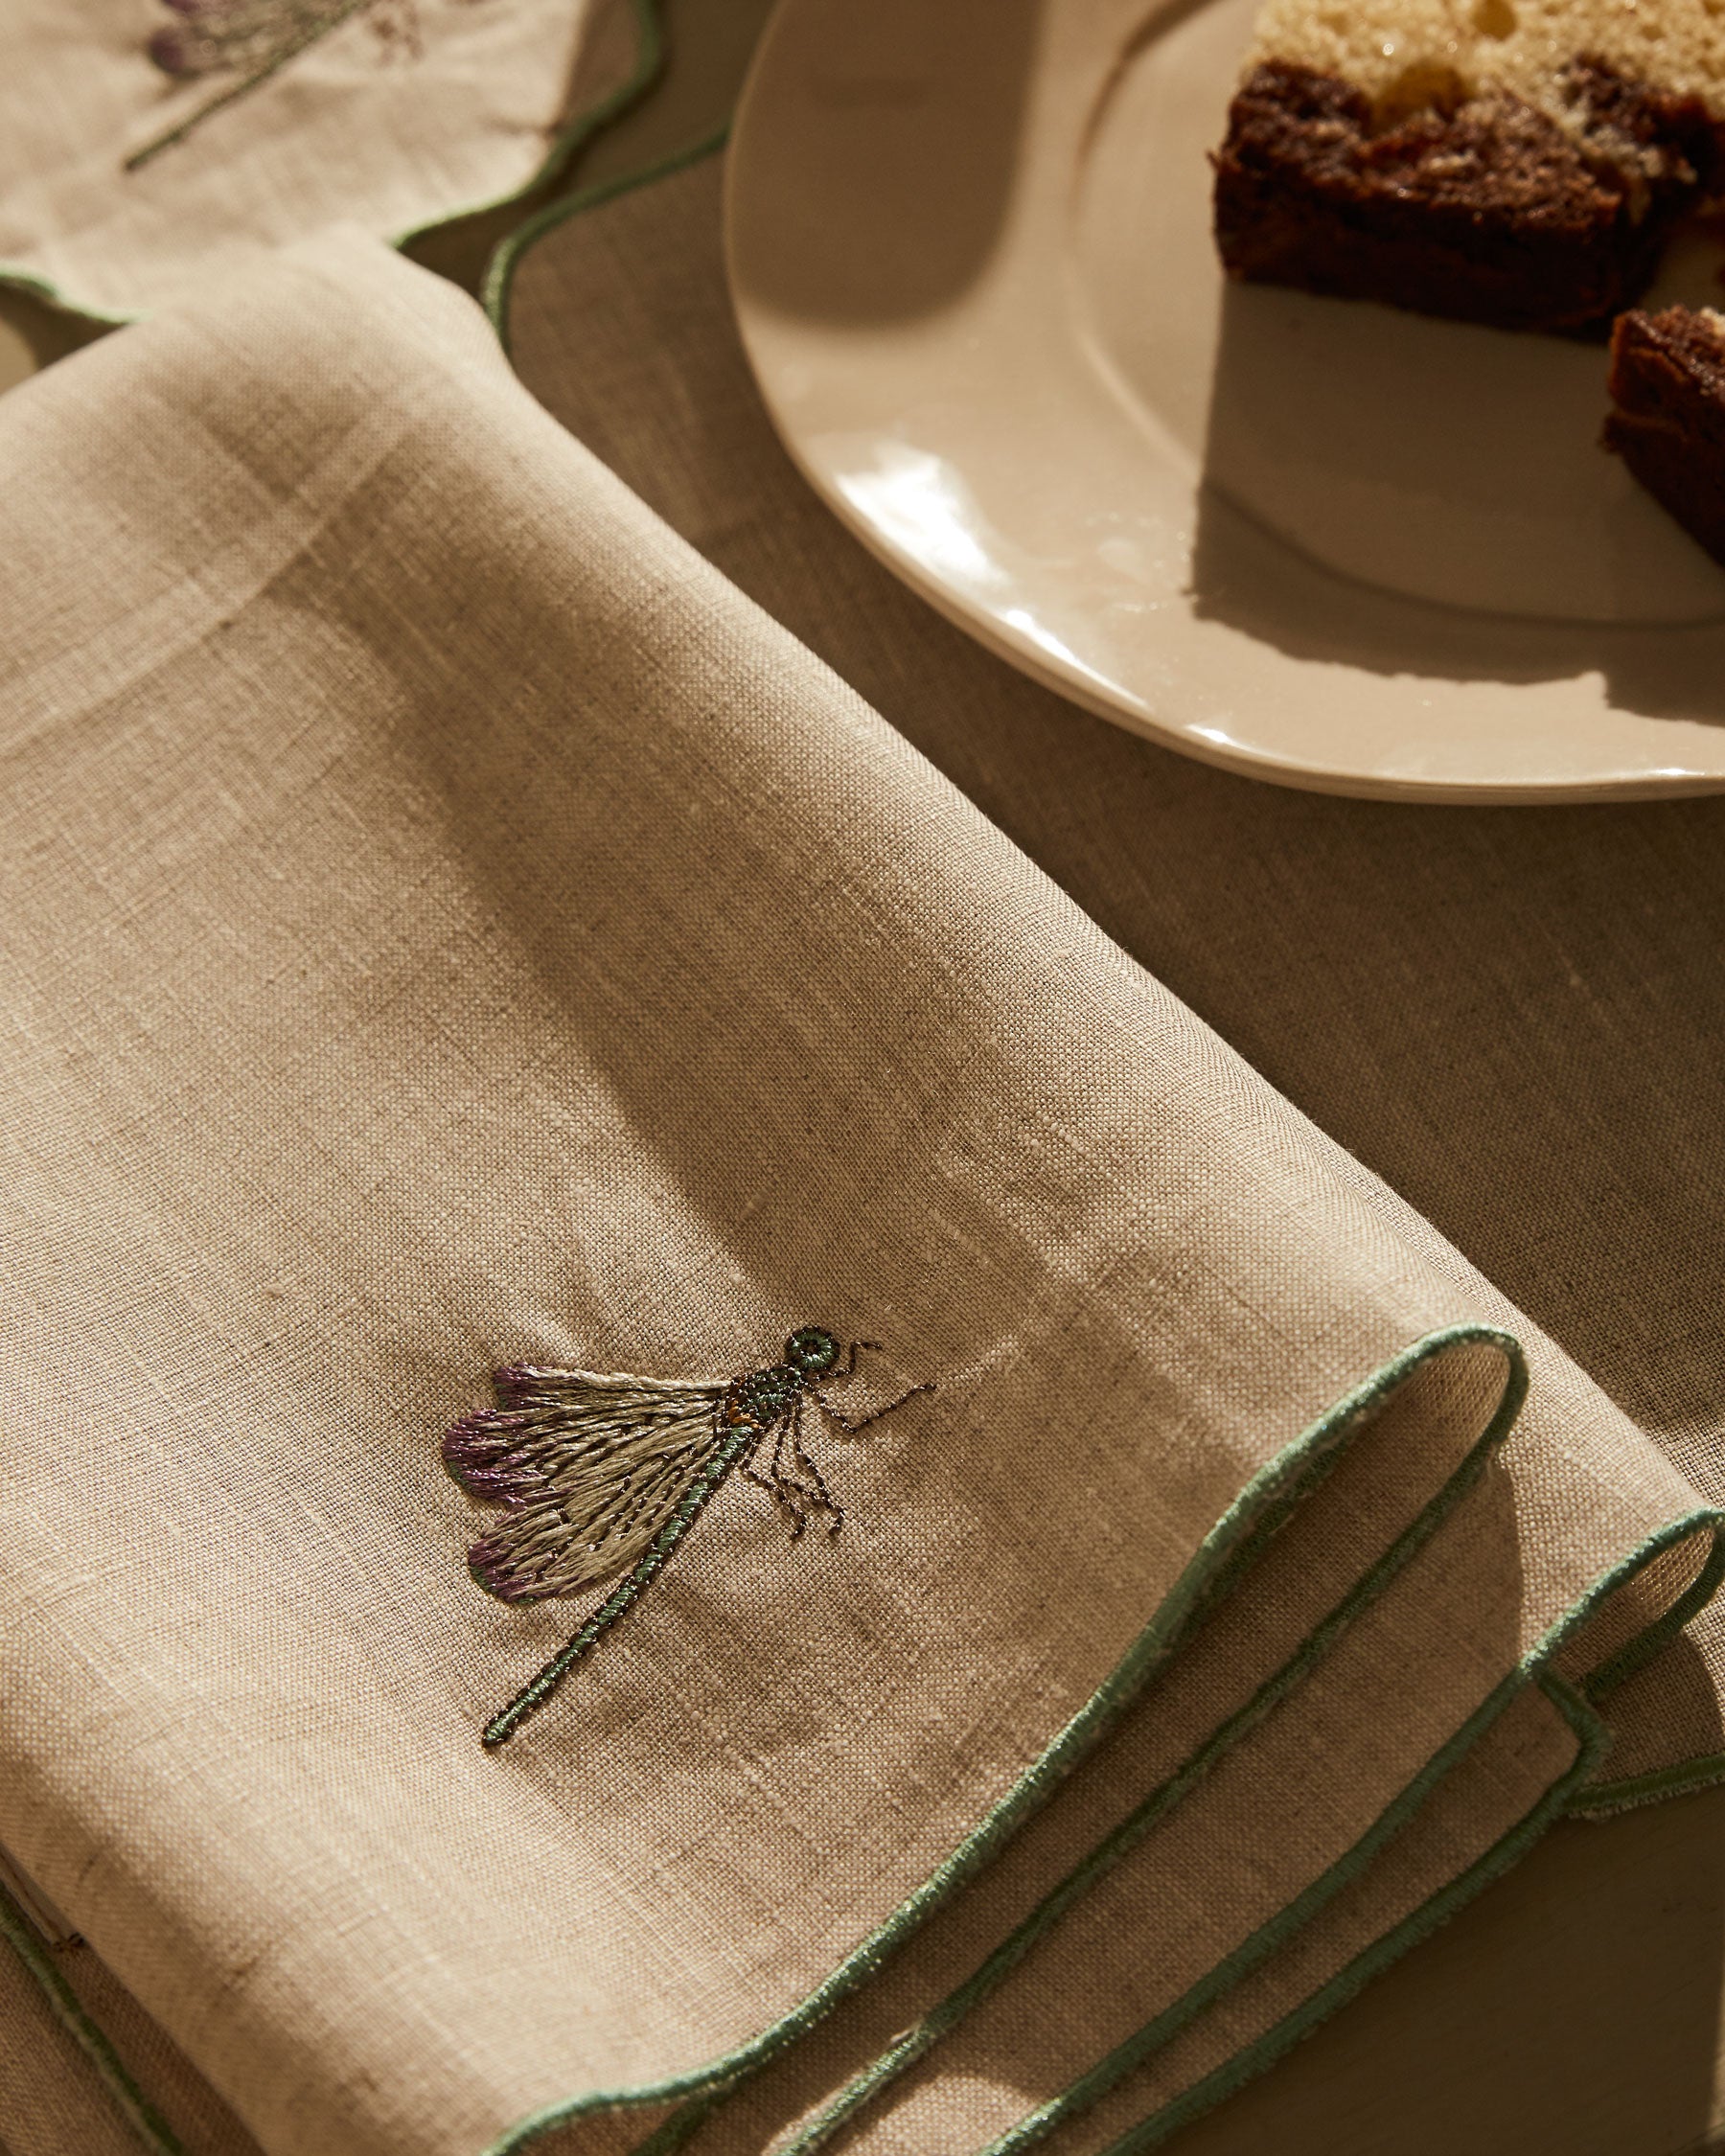 Hand Embroidered Dragonfly Napkin 